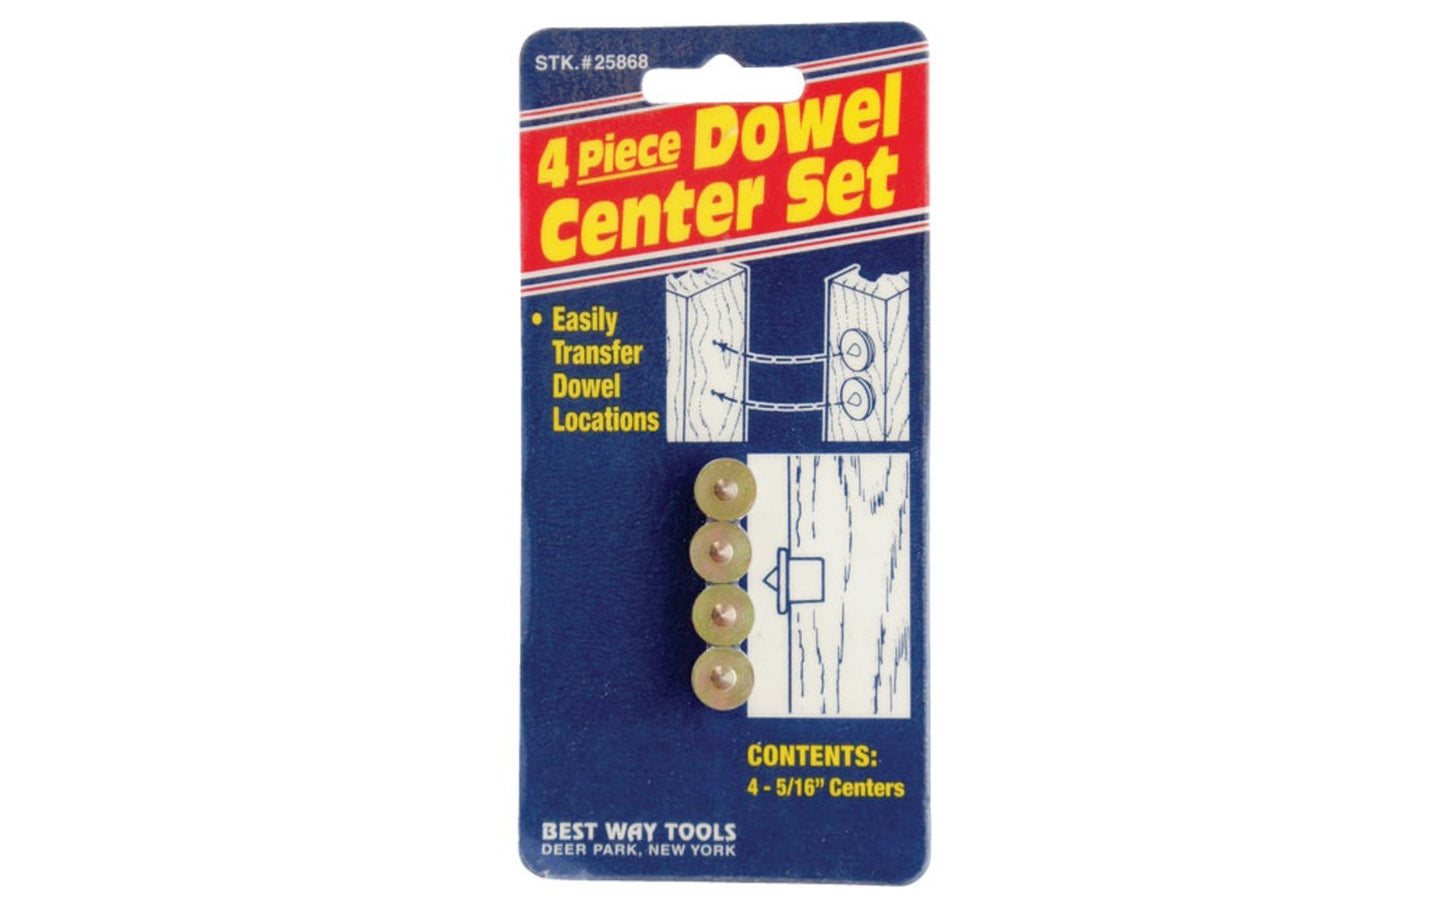 Best Way Tools 5/16" Dowel Centers - 4 PC Set. Makes dowel positioning quick & easy. Accurately marks holes for drilling. Includes 4 centers. Four piece set. Model 25868. 080497258689